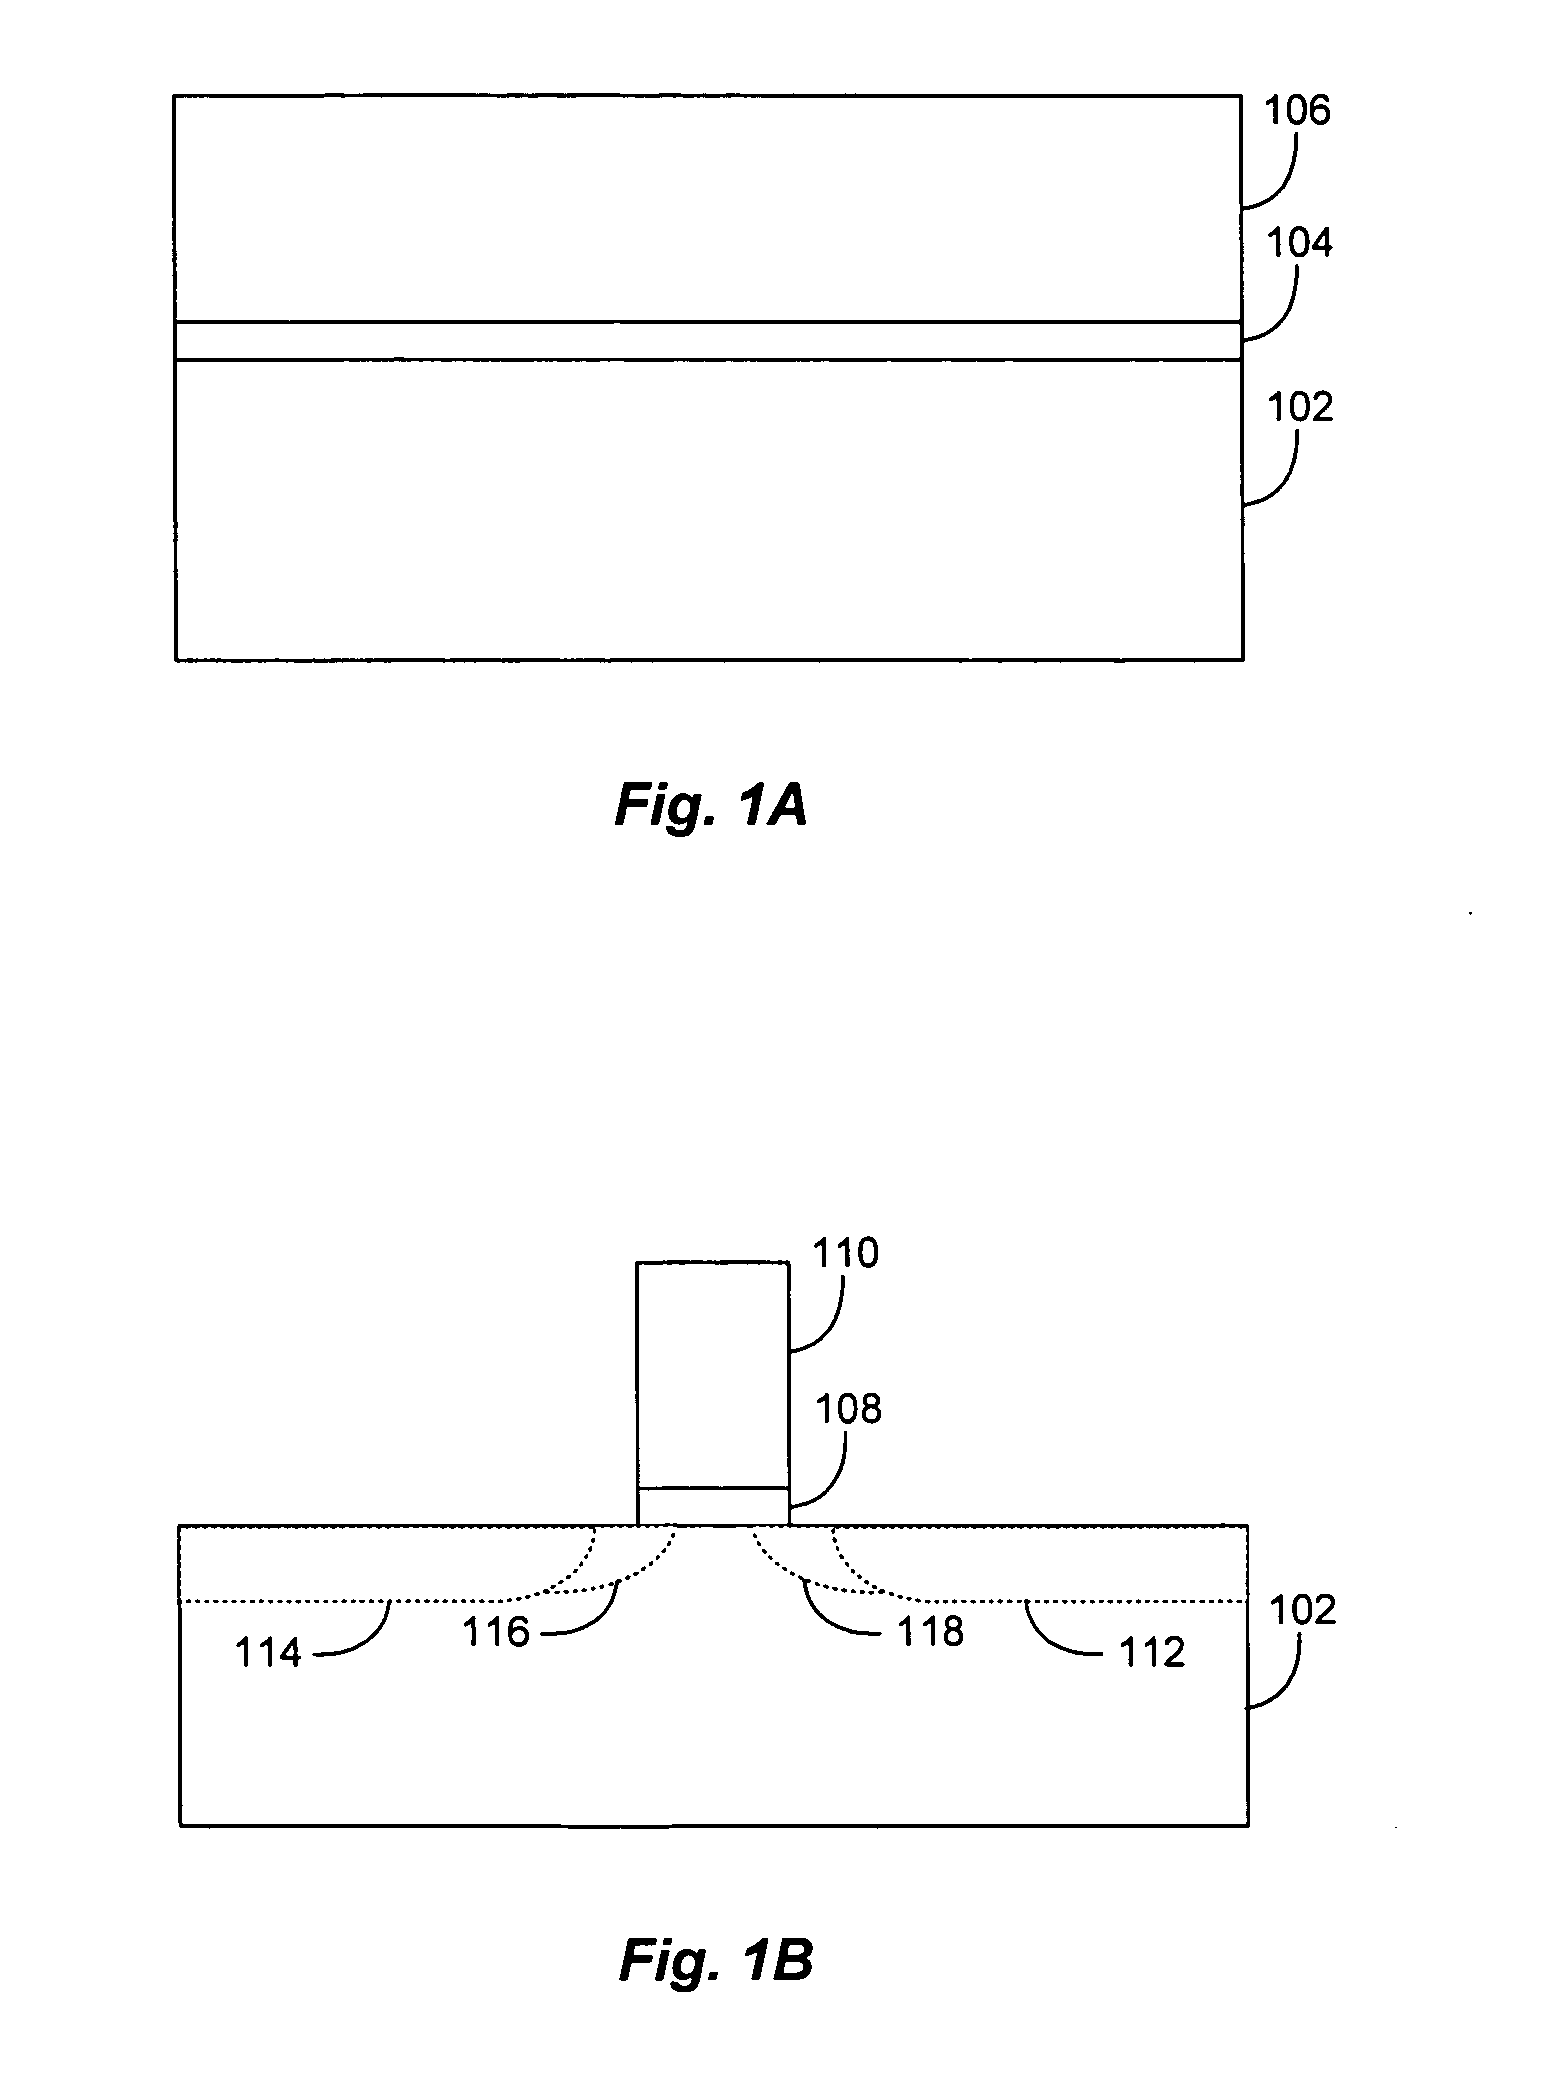 Method for forming a low thermal budget spacer